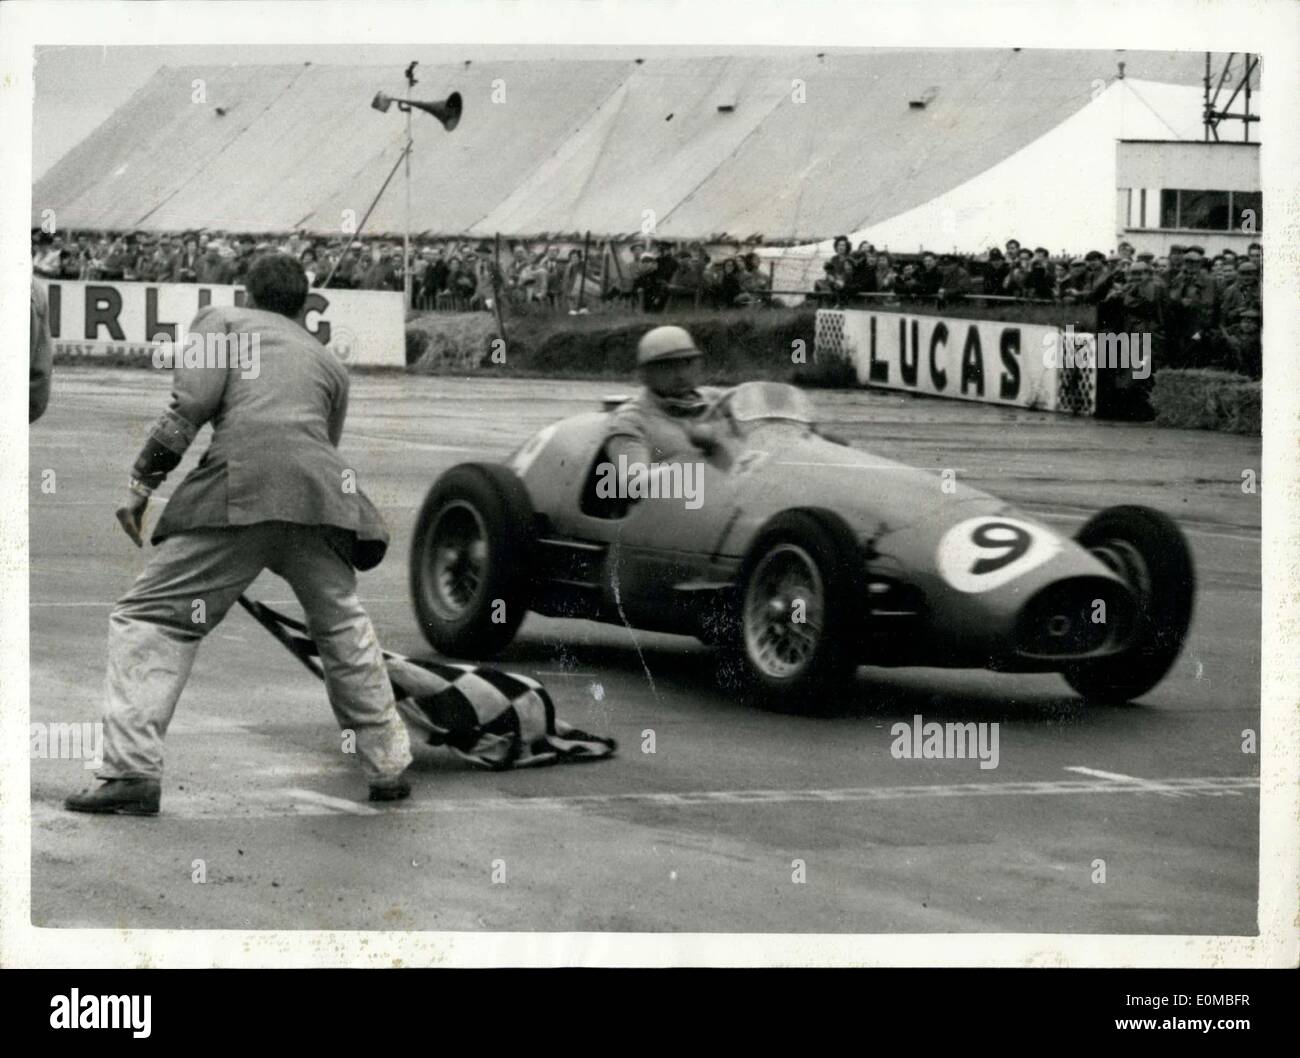 Jul. 17, 1954 - Gonzales Wins The British Grand Prix At Silverstone.. Crosses The Line.. Gonzalez the Argentine champion driving an Italian Ferrari won the British Grand Prix at Silverstone this afternoon.. Mike Hawthorn of Britain also driving a Ferrari came in second place.. Keystone Photo Shows:- Gonzalez is flagged across the line - when he won the race at Silverstone this afternoon. Stock Photo